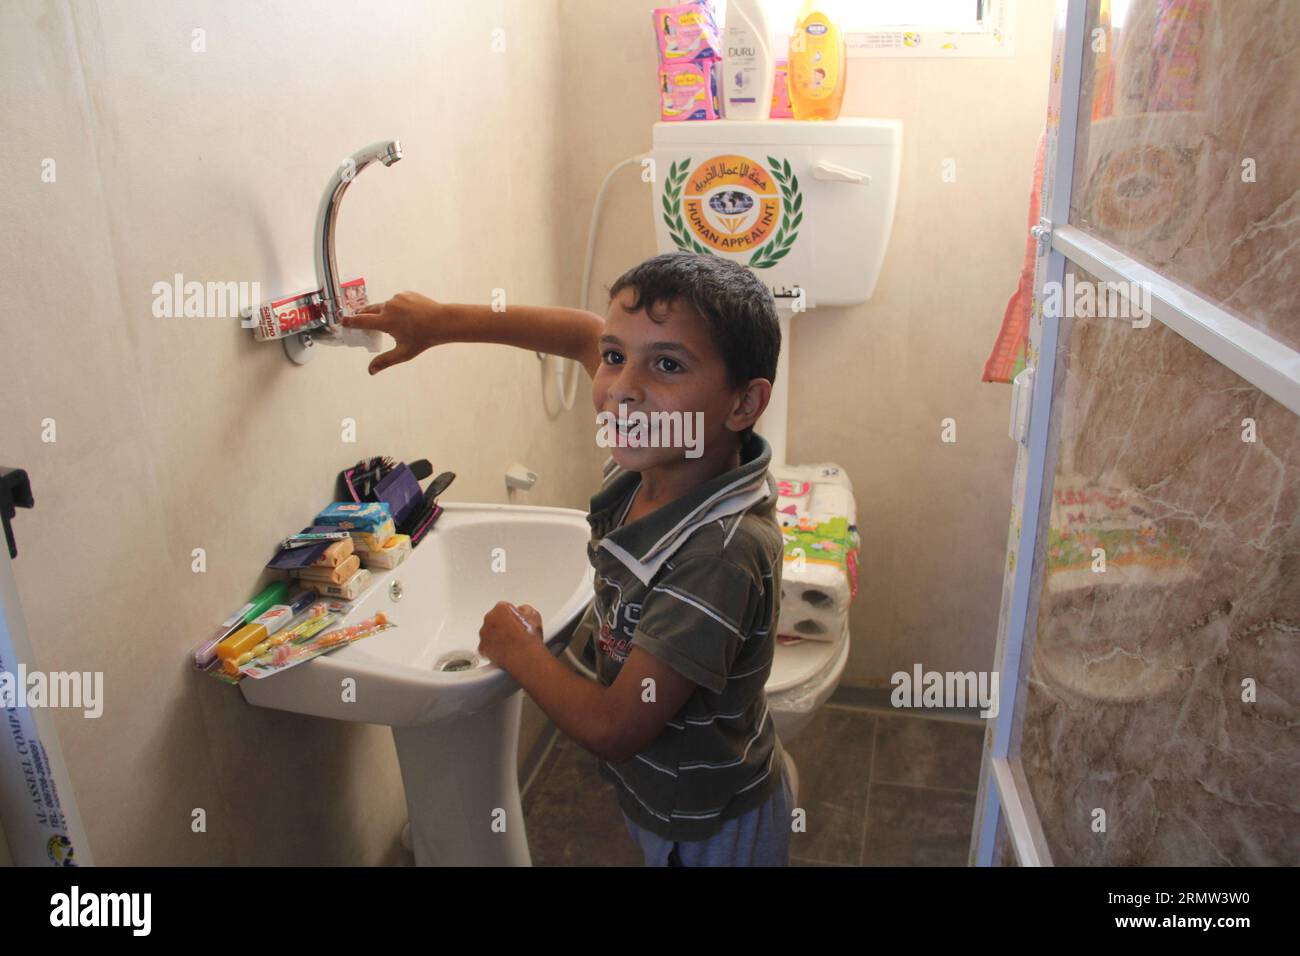 GAZA, Oct. 1, 2014 -- A Palestinian boy checks his new mobile home after they were made homeless in the recent Israeli-Hamas war, in Khuzaa neighborhood in the southern Gaza Strip city of Khan Younis, on October 1, 2014. ) MIDEAST-GAZA- MOBILE-HOMES KhaledxOmar PUBLICATIONxNOTxINxCHN   Gaza OCT 1 2014 a PALESTINIAN Boy Checks His New Mobile Home After They Were Made Home in The Recent Israeli Hamas was in  Neighborhood in The Southern Gaza Strip City of Khan Younis ON October 1 2014 Mideast Gaza Mobile Homes  PUBLICATIONxNOTxINxCHN Stock Photo